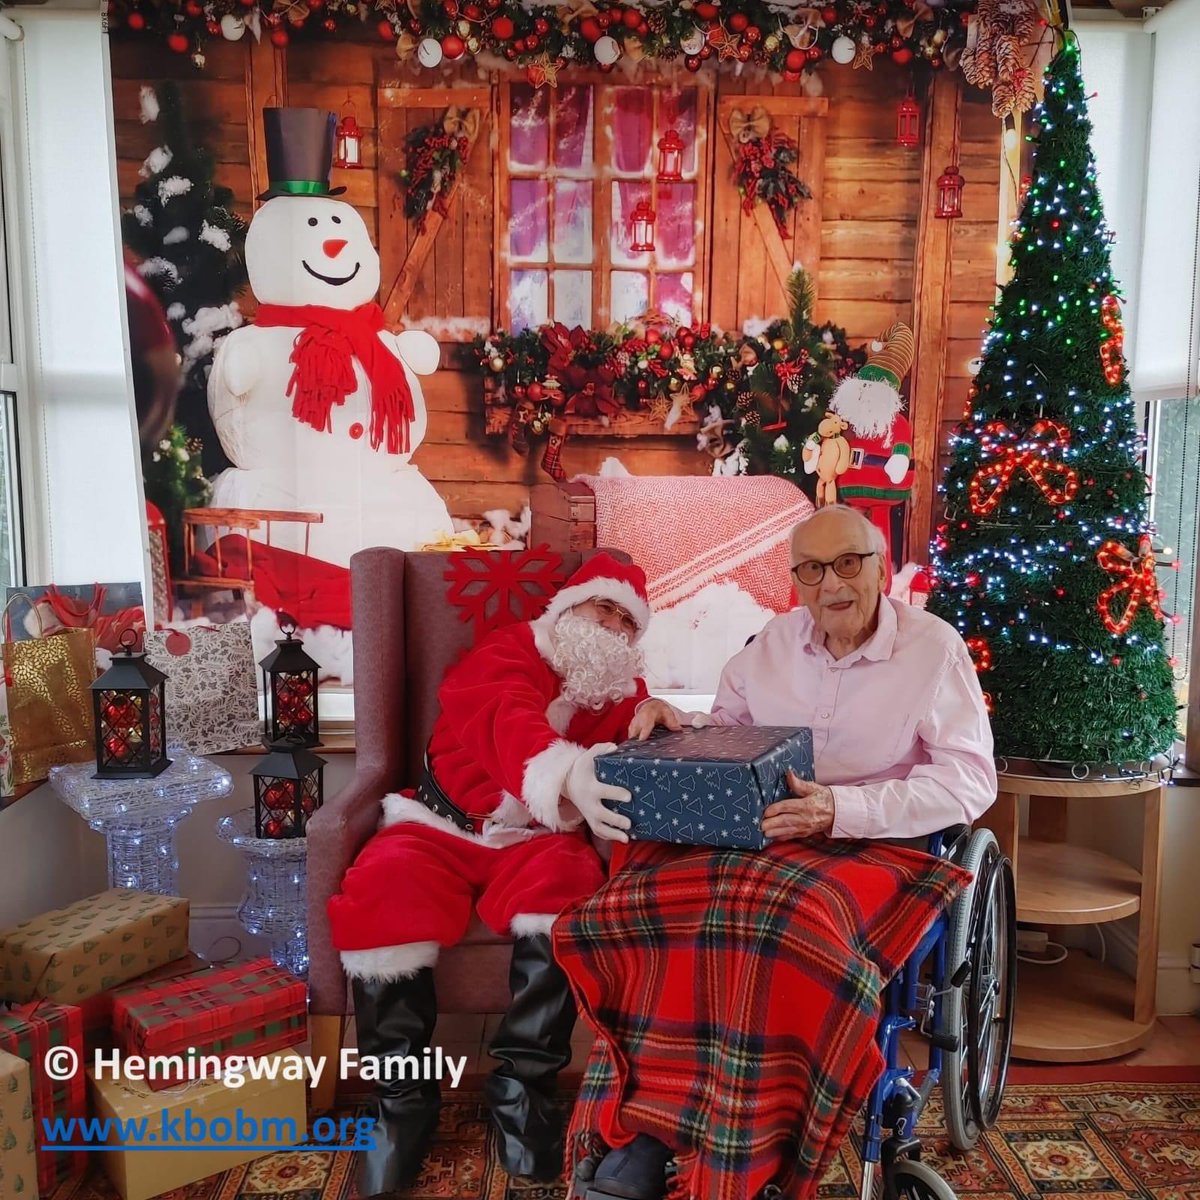 Delighted to share that our last of the ‘Few’ Gp Cpt John ‘Paddy’ Hemingway DFC even got a visit from Santa this Xmas, aged 104 years young! Image provided courtesy of the Hemingway family. #TheFew